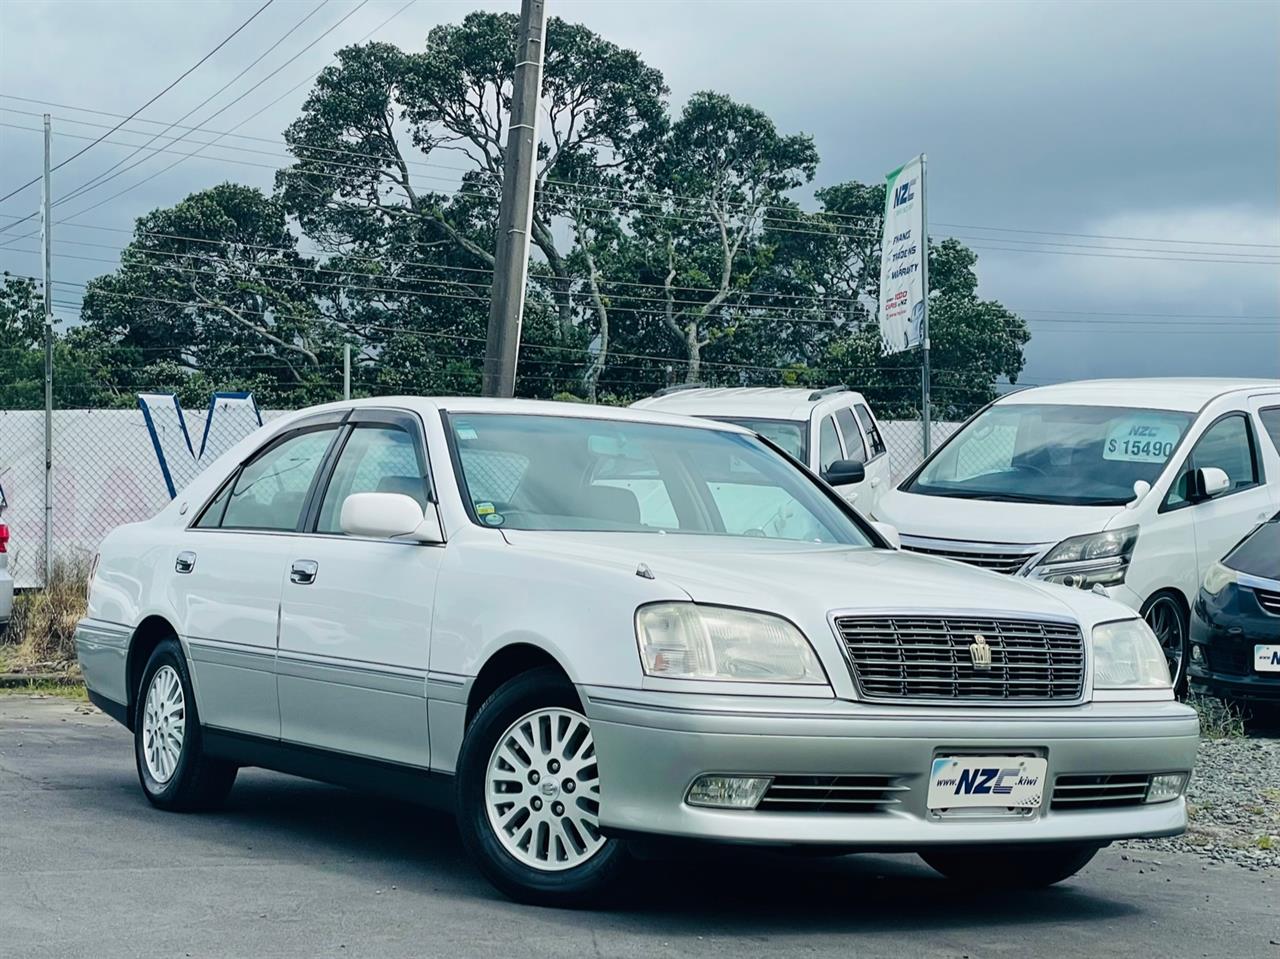 NZC 1999 Toyota Crown just arrived to Auckland